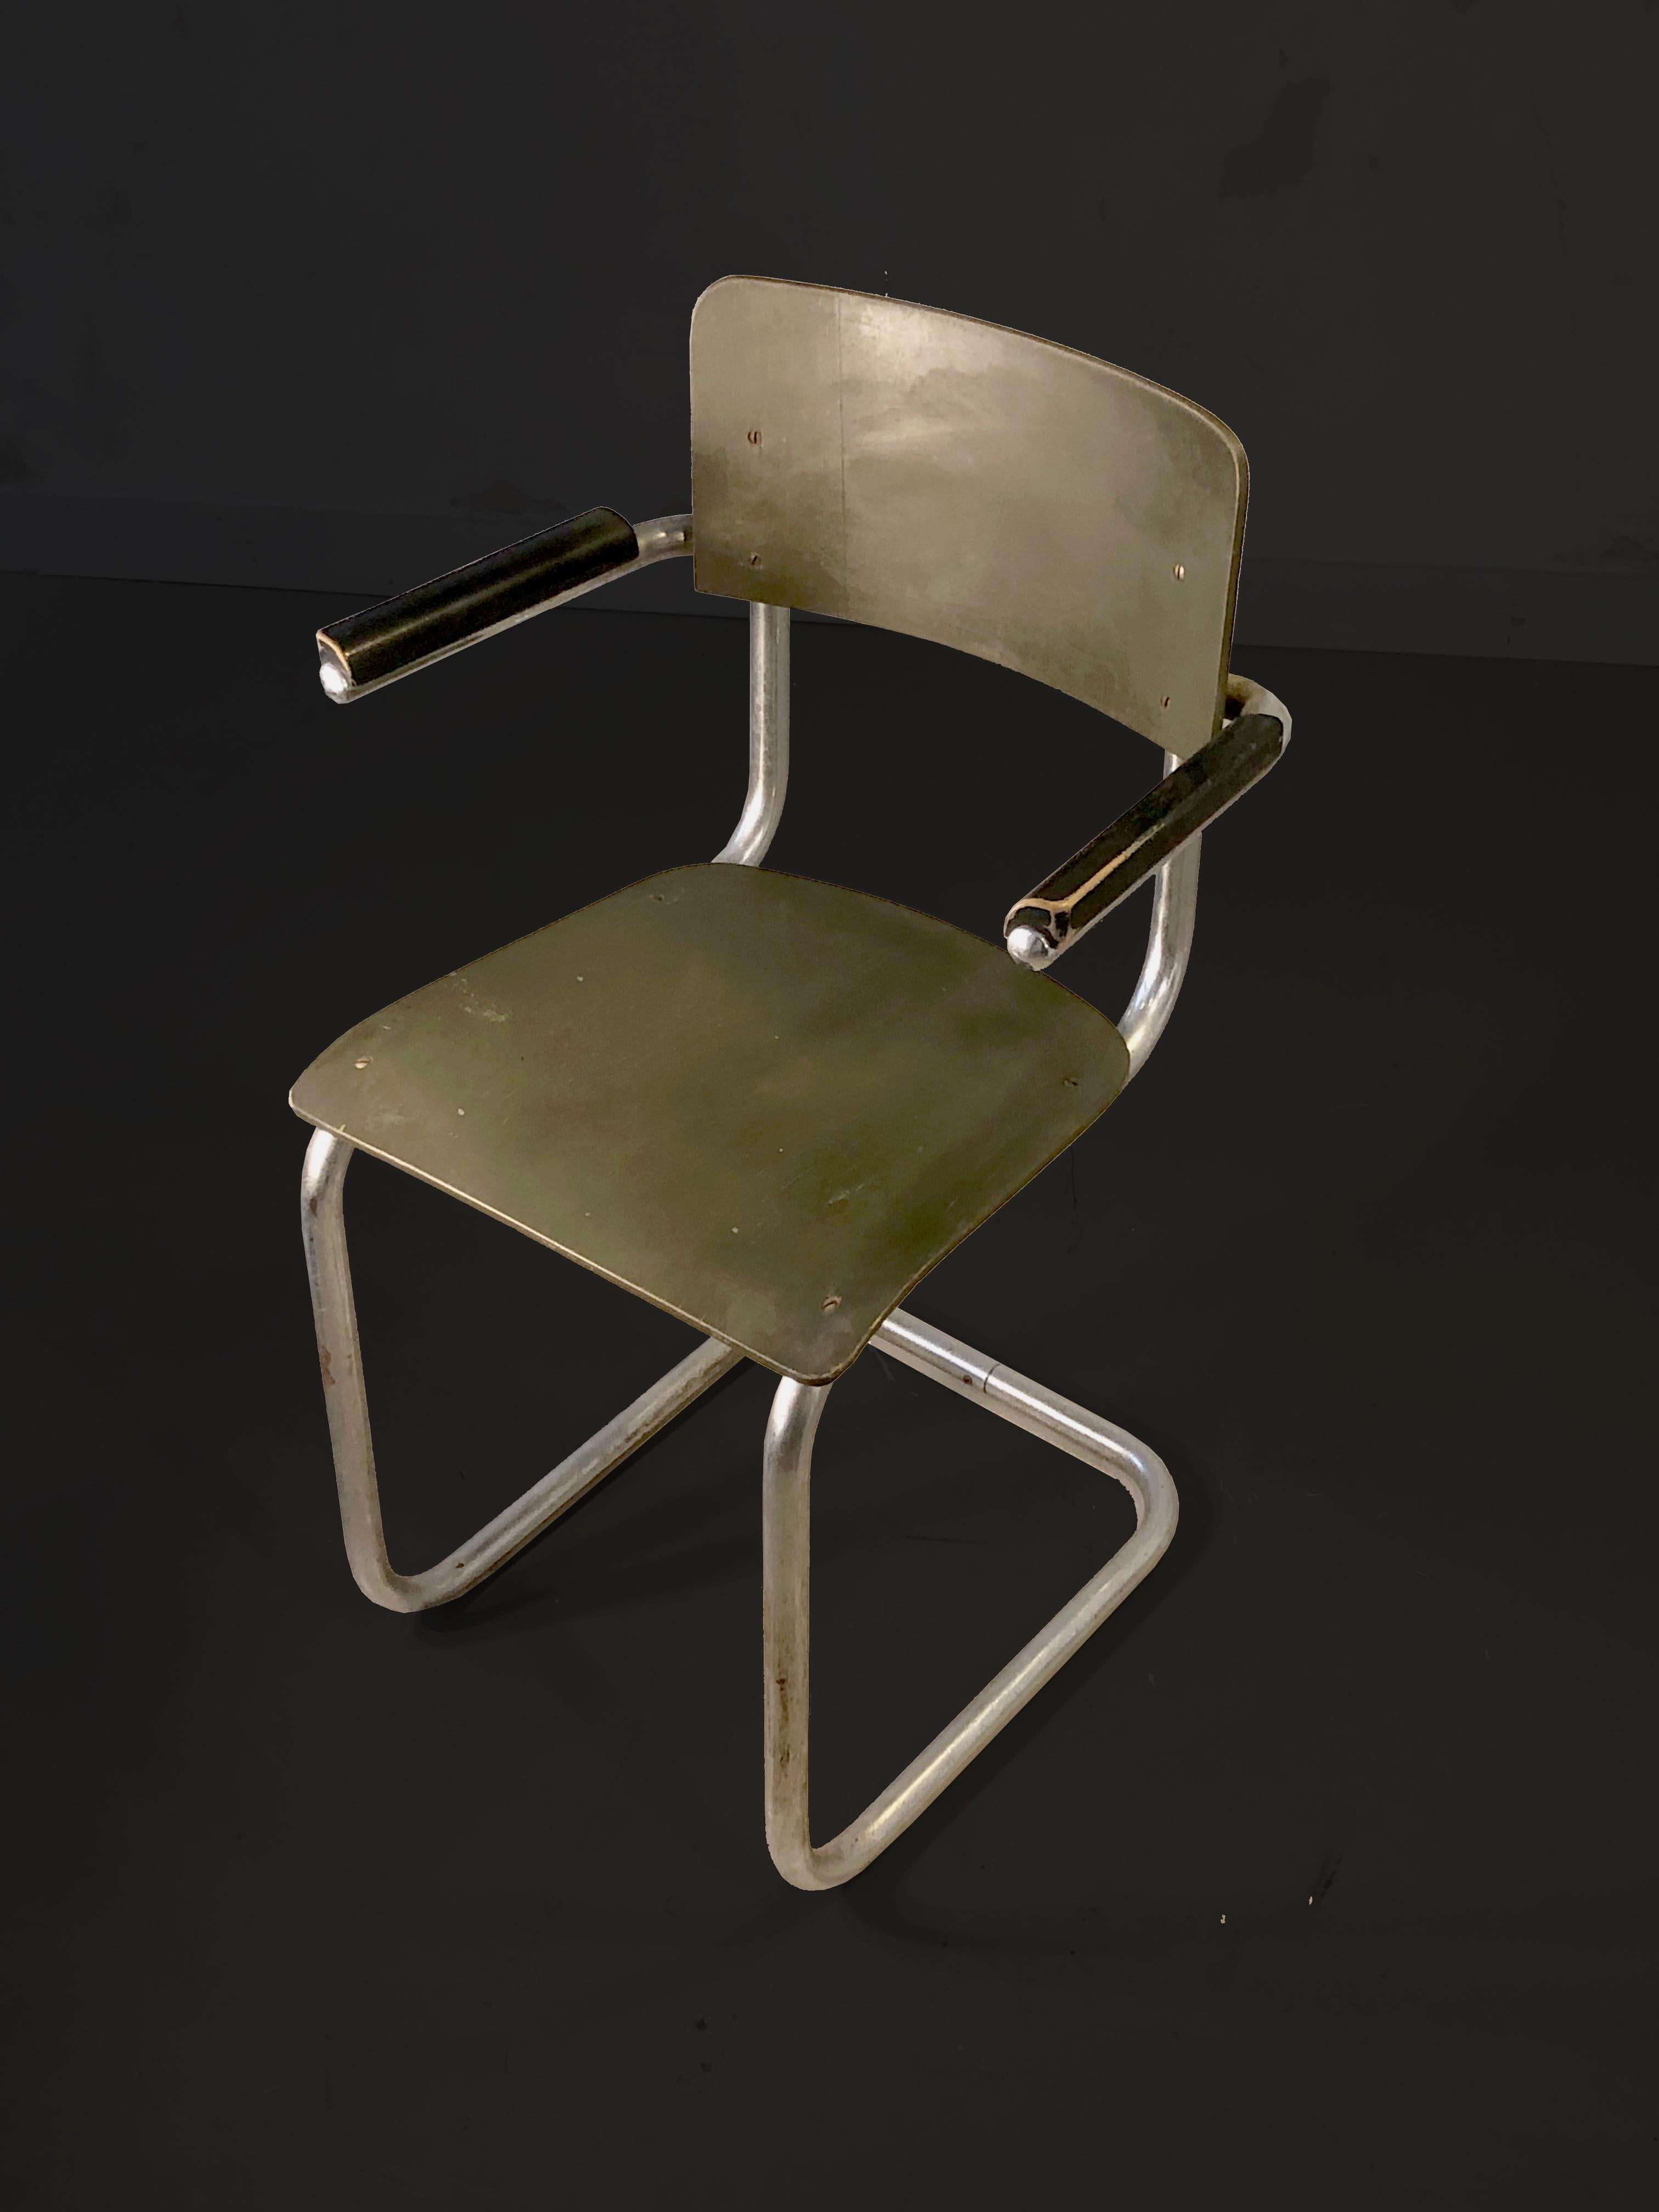 Bauhaus An Early MODERNIST BAUHAUS CHAIR by MART STAM for MAUSER WERKE, Germany 1930 For Sale